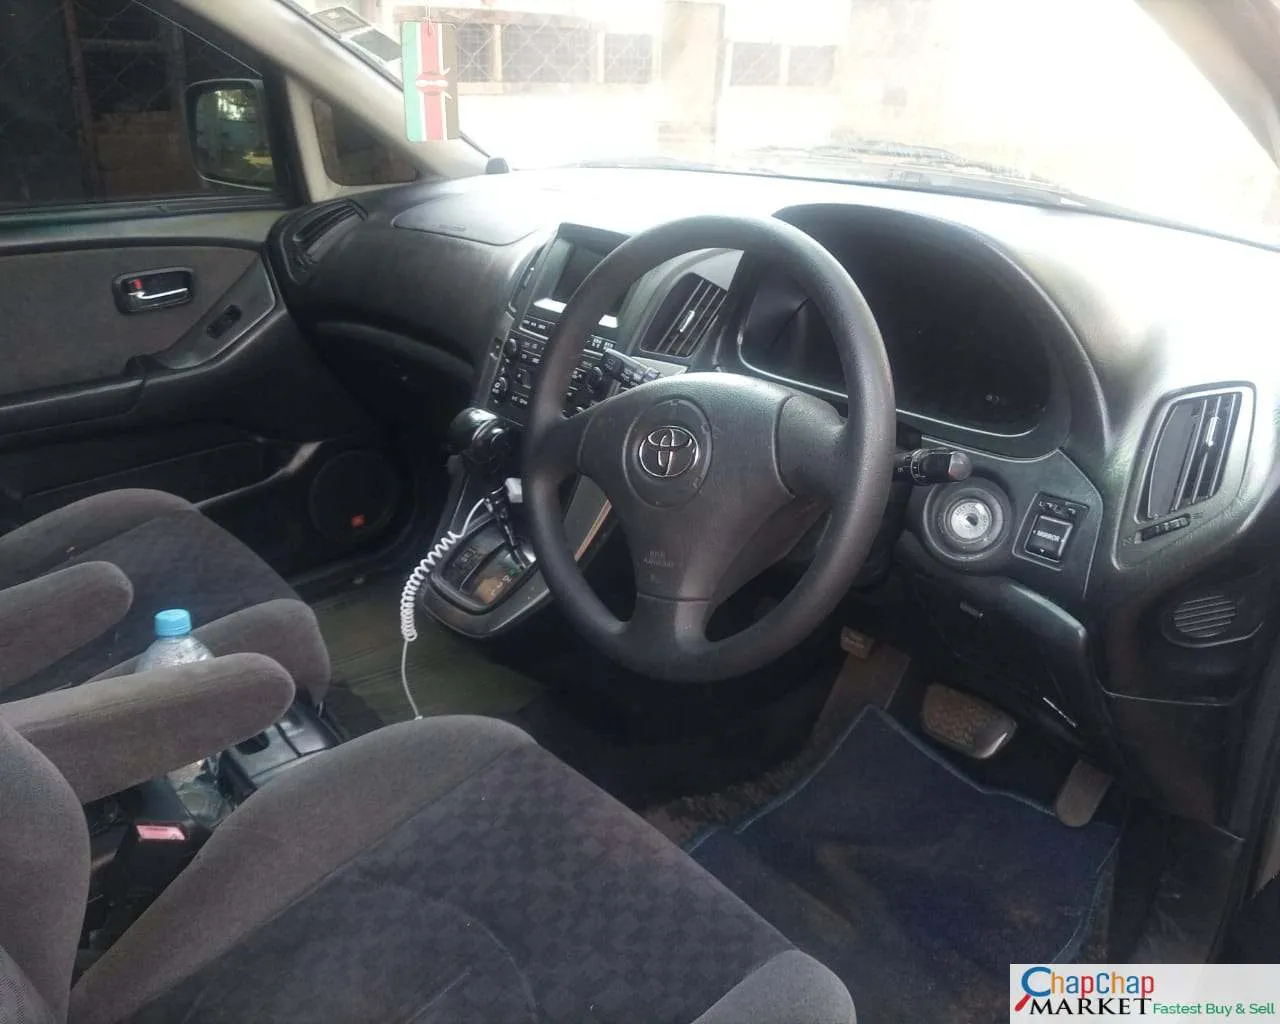 Cars Cars For Sale-Toyota Harrier kenya You Pay 30% Deposit Trade in OK Toyota harrier for sale in kenya hire purchase installments EXCLUSIVE 3